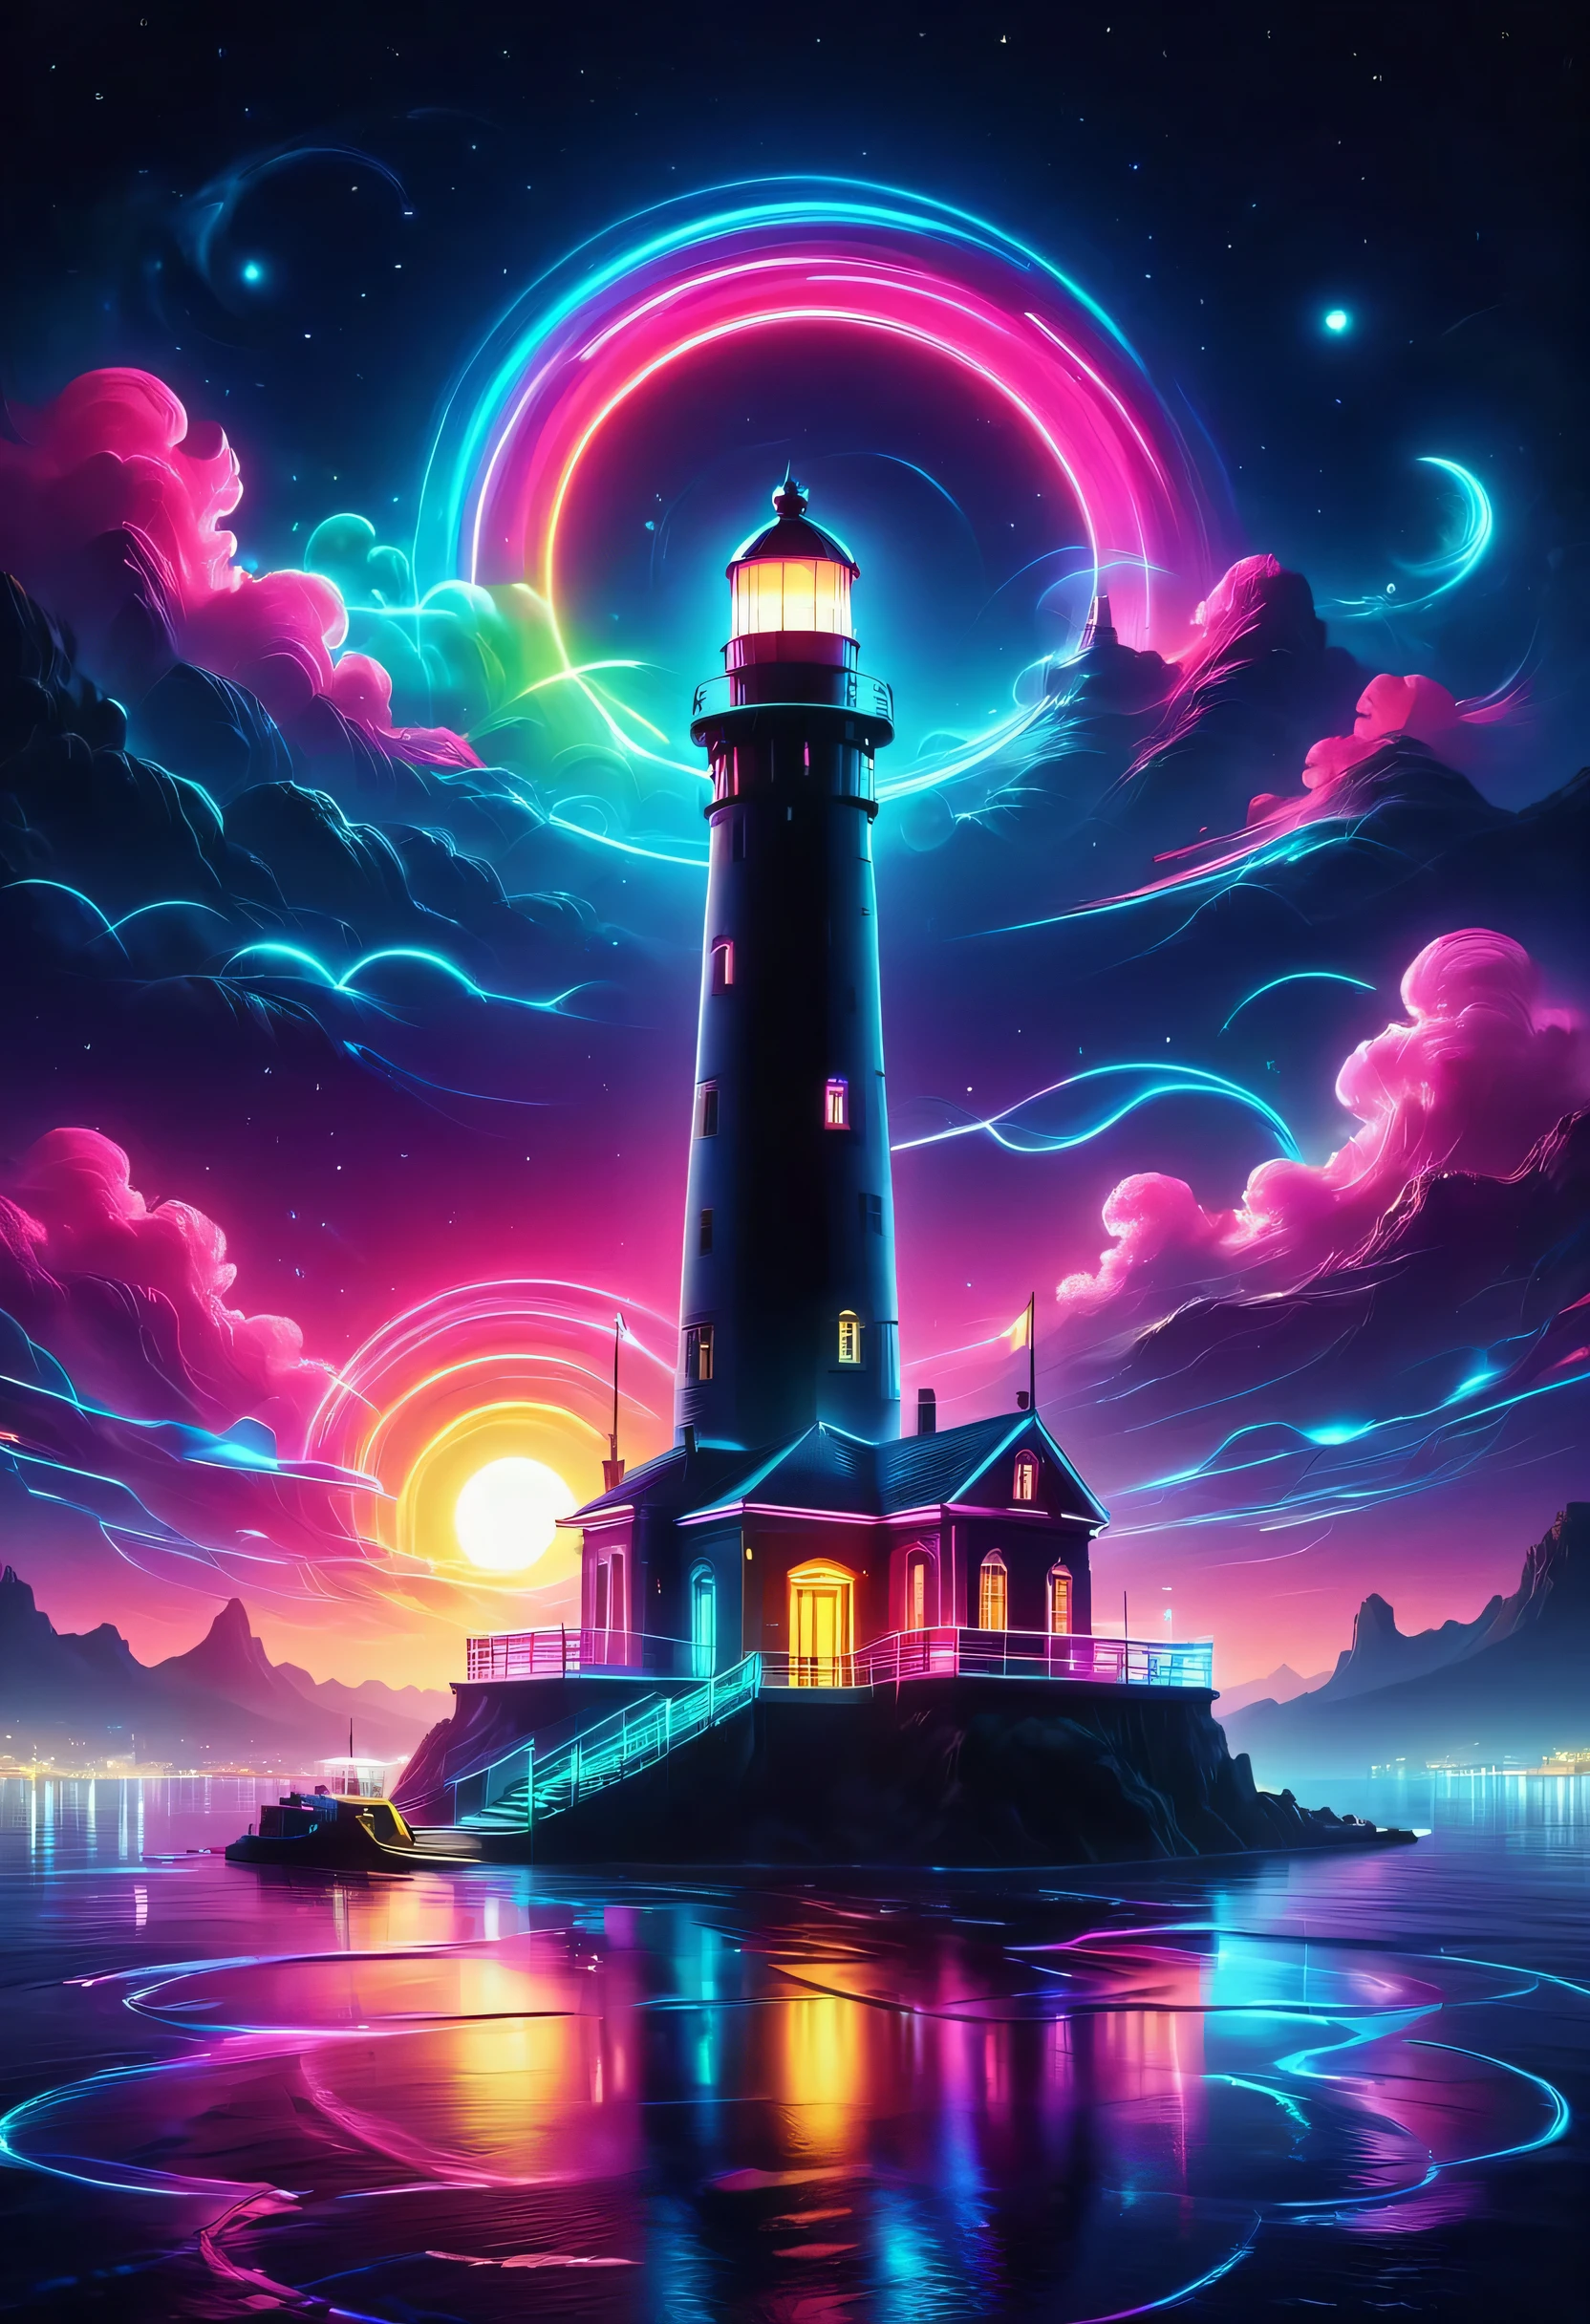 The aesthetics of vaporwave,Landscape painting,Lighthouse colored in neon colors,port town,marina,boat,moon,Star,cloud,Aurora,beautiful,rich colors,flash,and a bright flash,Cast colorful spells,Draw in neon colors on a dark background,A fusion of old-fashioned port town scenery and modern art,Pop Illustration,posters,perfect composition,Design that expresses Italy,tangled,magic element,wonderful,masterpiece,4K,works of art,Bright colors,black,pink,Light blue,purple